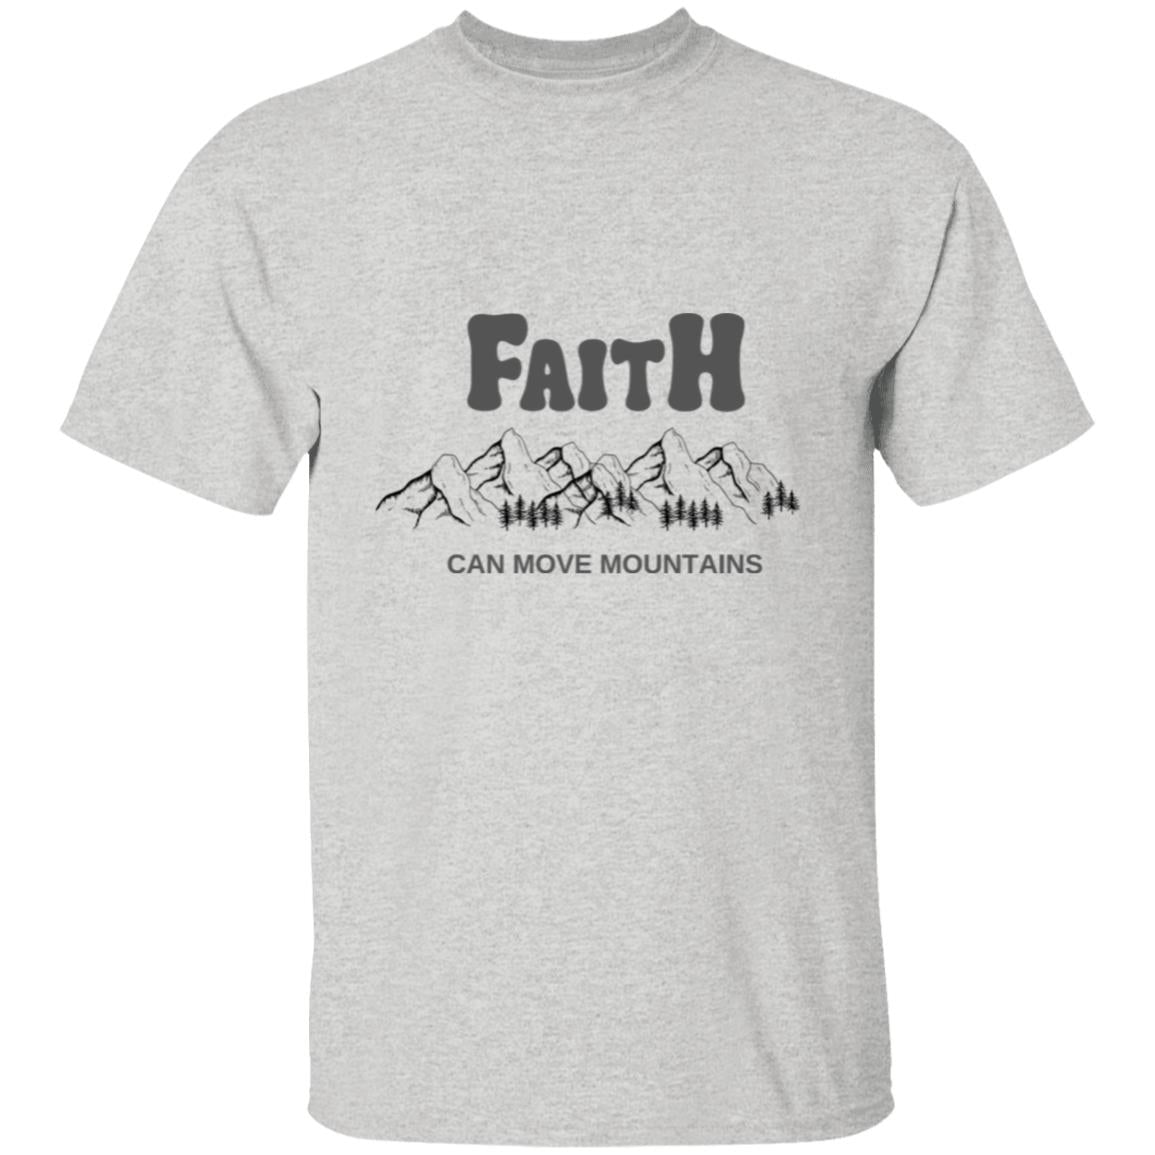 Get trendy with Faith Can Move Mouuntains (1) Faith Can Move Mountains T-Shirt - T-Shirts available at Good Gift Company. Grab yours for $18.95 today!